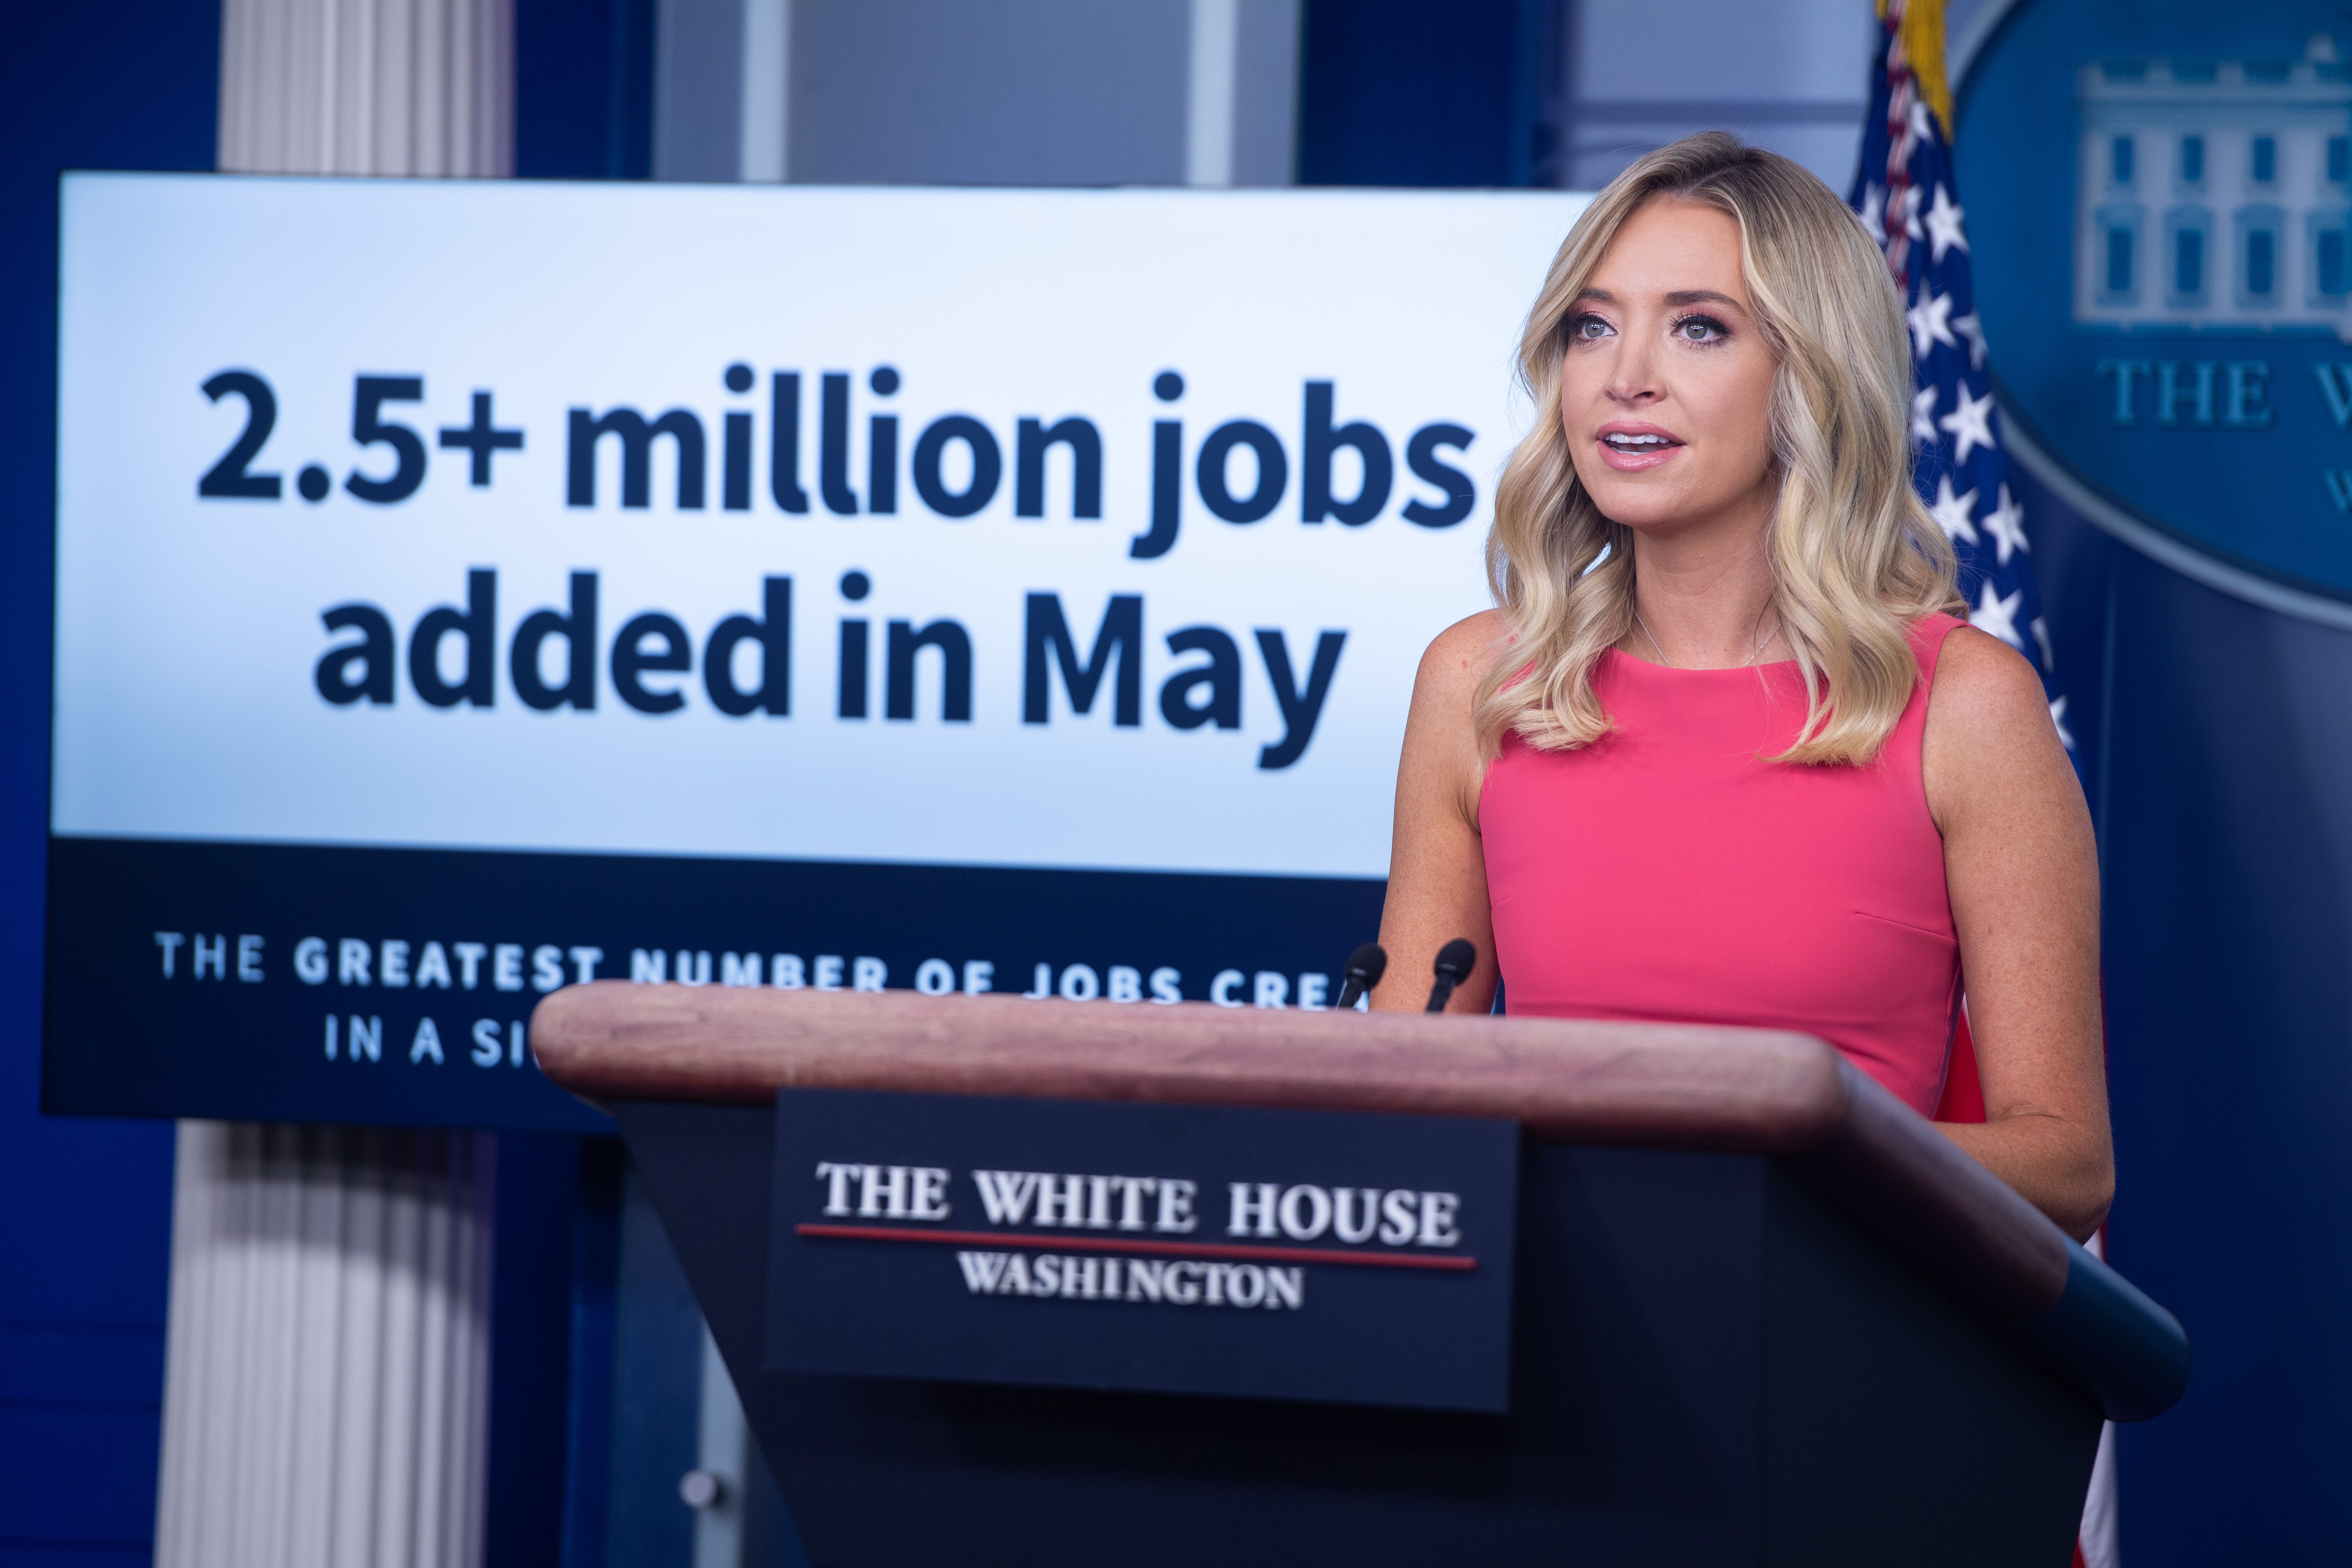 White House Press Secretary Kayleigh McEnany holds a press briefing at the White House in Washington, DC, June 8, 2020. - Democratic lawmakers knelt in silent tribute to George Floyd in the US Congress on June 8, 2020 before unveiling a package of sweeping police reforms in response to the killing of African Americans by law enforcement. (Photo by SAUL LOEB/AFP via Getty Images)